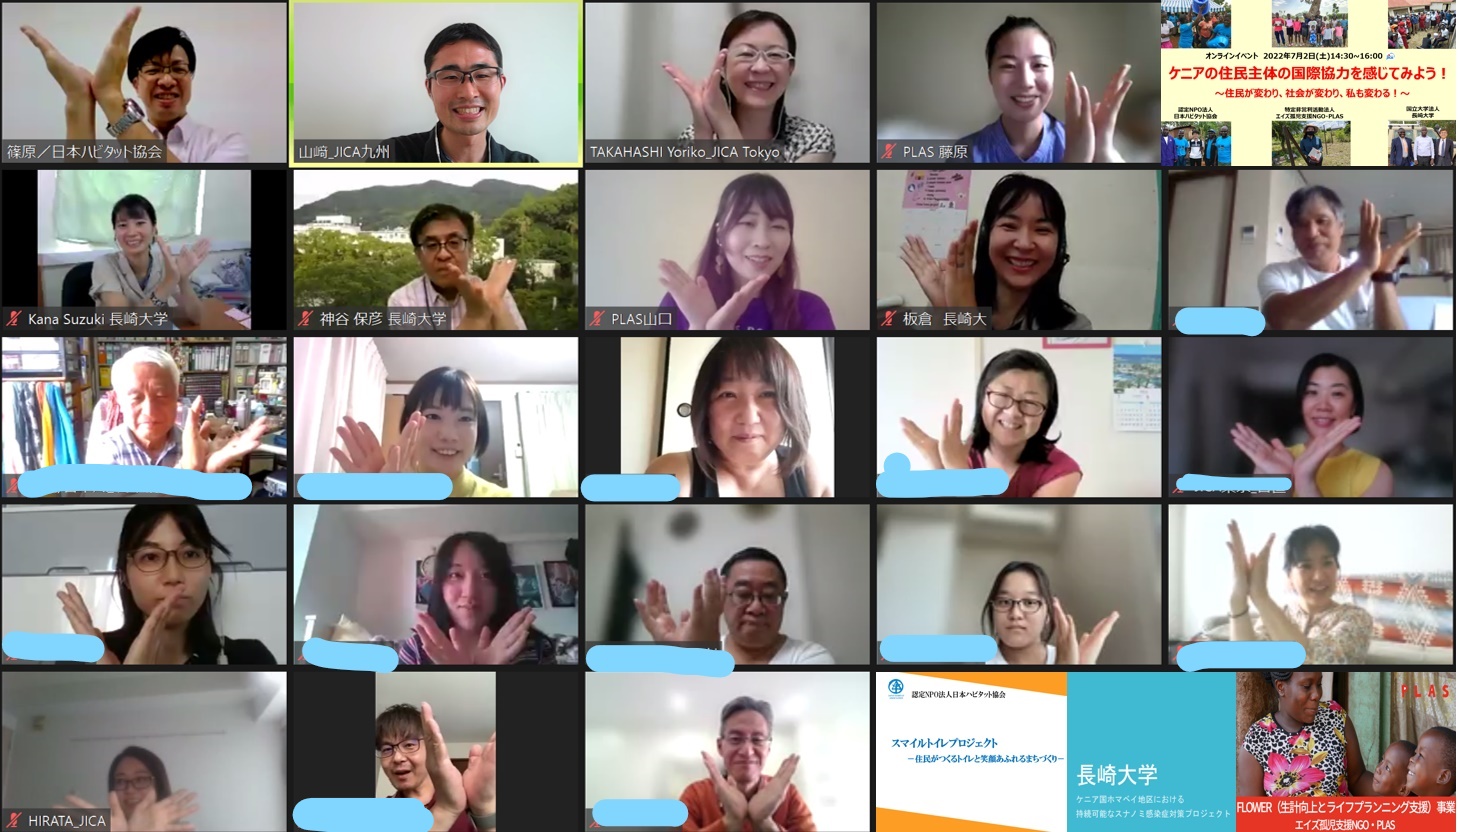 We held an online meeting for the people in Japan to share with them about the project progress!